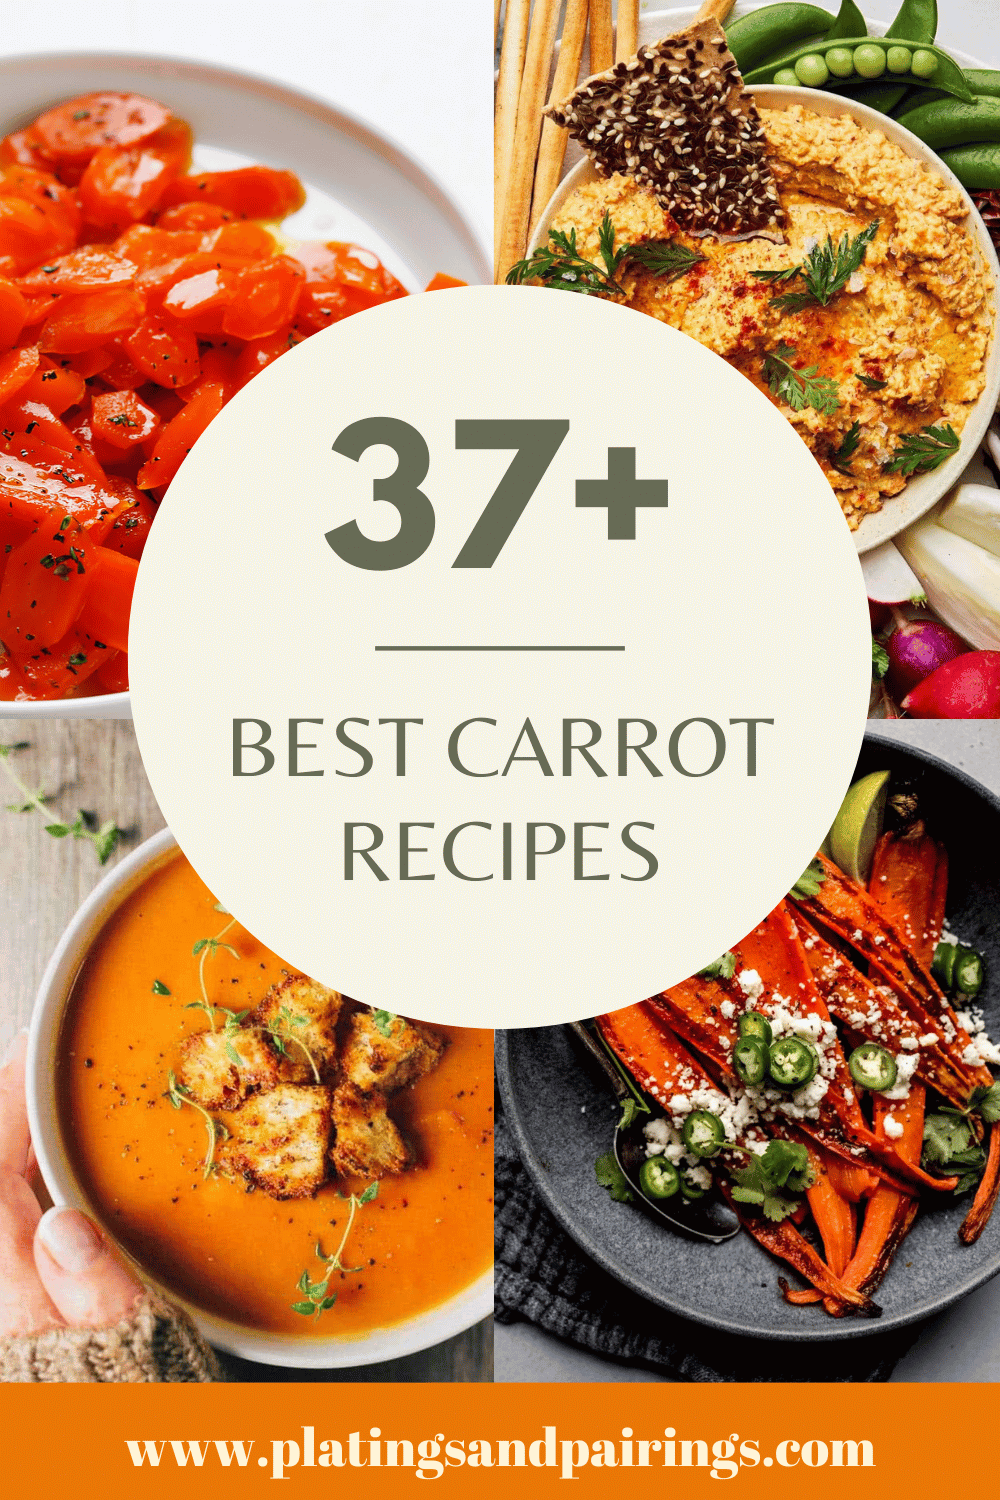 Collage of carrot recipes with text overlay.